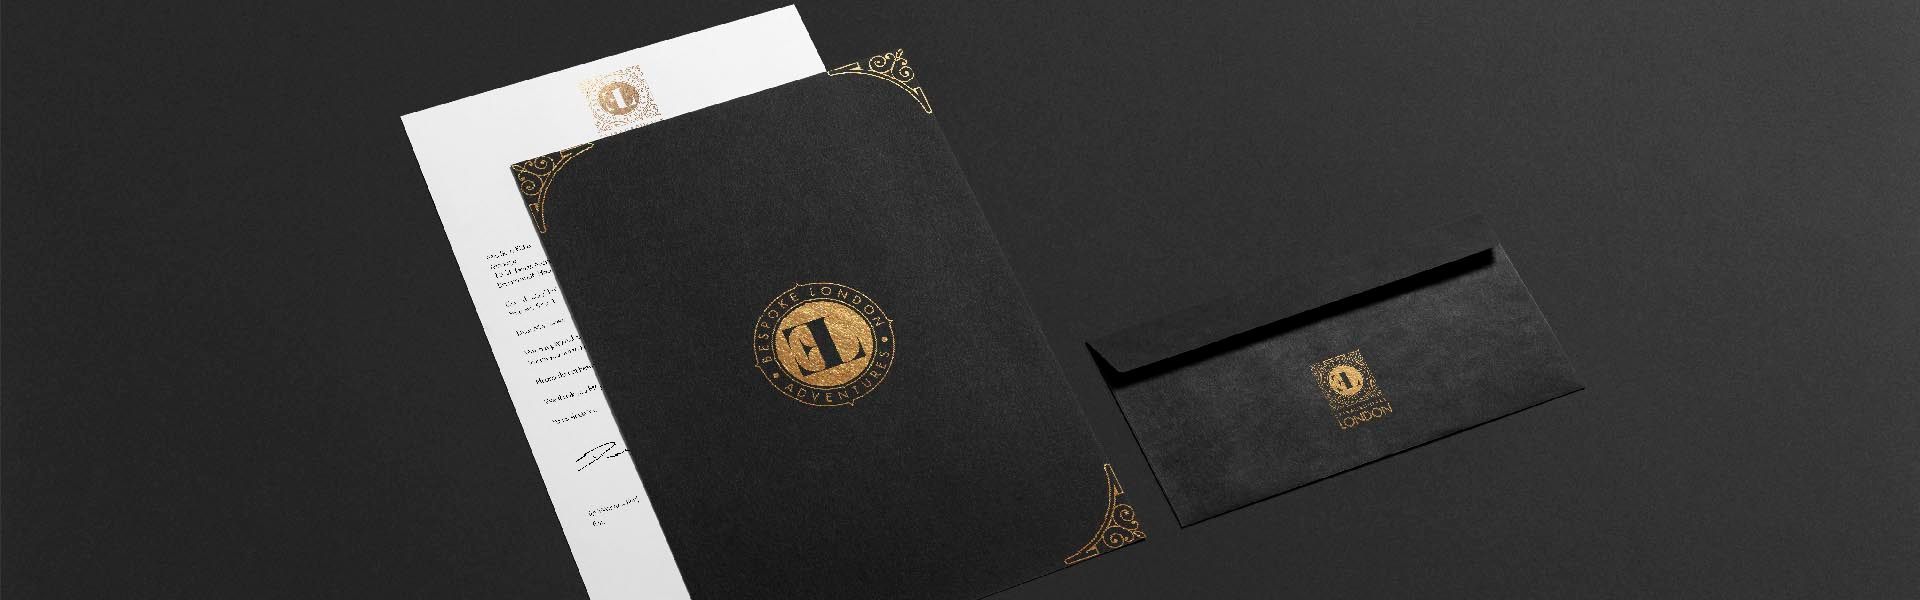 a black envelope and printed stationery with the extraordinary london logo printed in gold